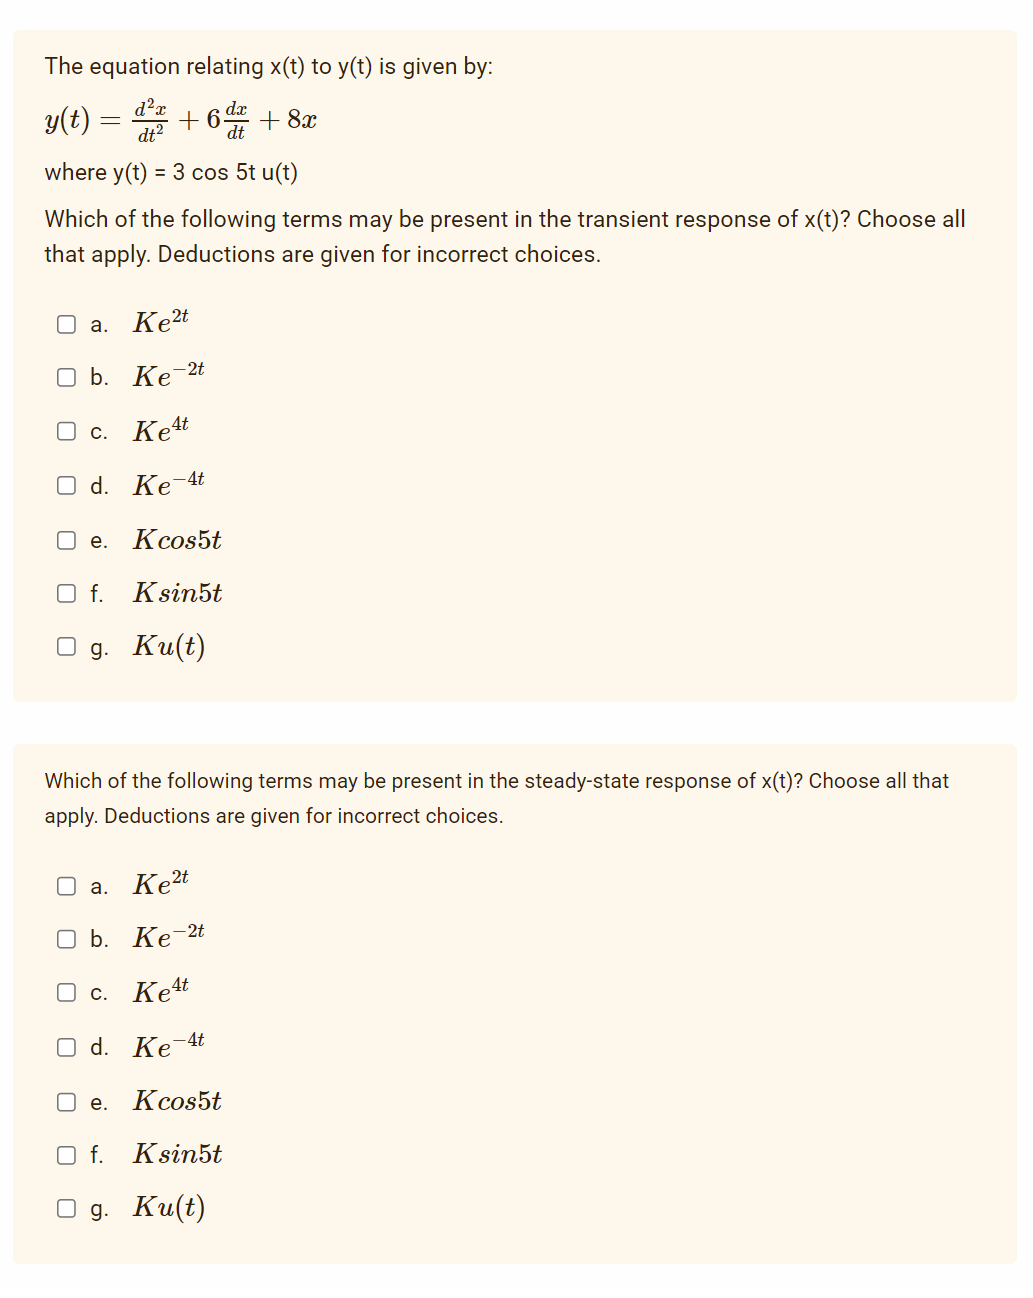 The equation relating x(t) to y(t) is given by:
dx
d²x
dt²
+6 da + 8x
dt
where y(t) = 3 cos 5t u(t)
y(t)
=
Which of the following terms may be present in the transient response of x(t)? Choose all
that apply. Deductions are given for incorrect choices.
O a. Ke2t
O b. Ke-2t
Oc. Ke4t
O d. Ke-4t
Kcos5t
O f. Ksin5t
g. Ku(t)
e.
Which of the following terms may be present in the steady-state response of x(t)? Choose all that
apply. Deductions are given for incorrect choices.
O a. Ke²t
O b. Ke-2t
Oc. Ket
O d. Ke-4t
Kcos5t
O f. Ksin5t
g. Ku(t)
e.